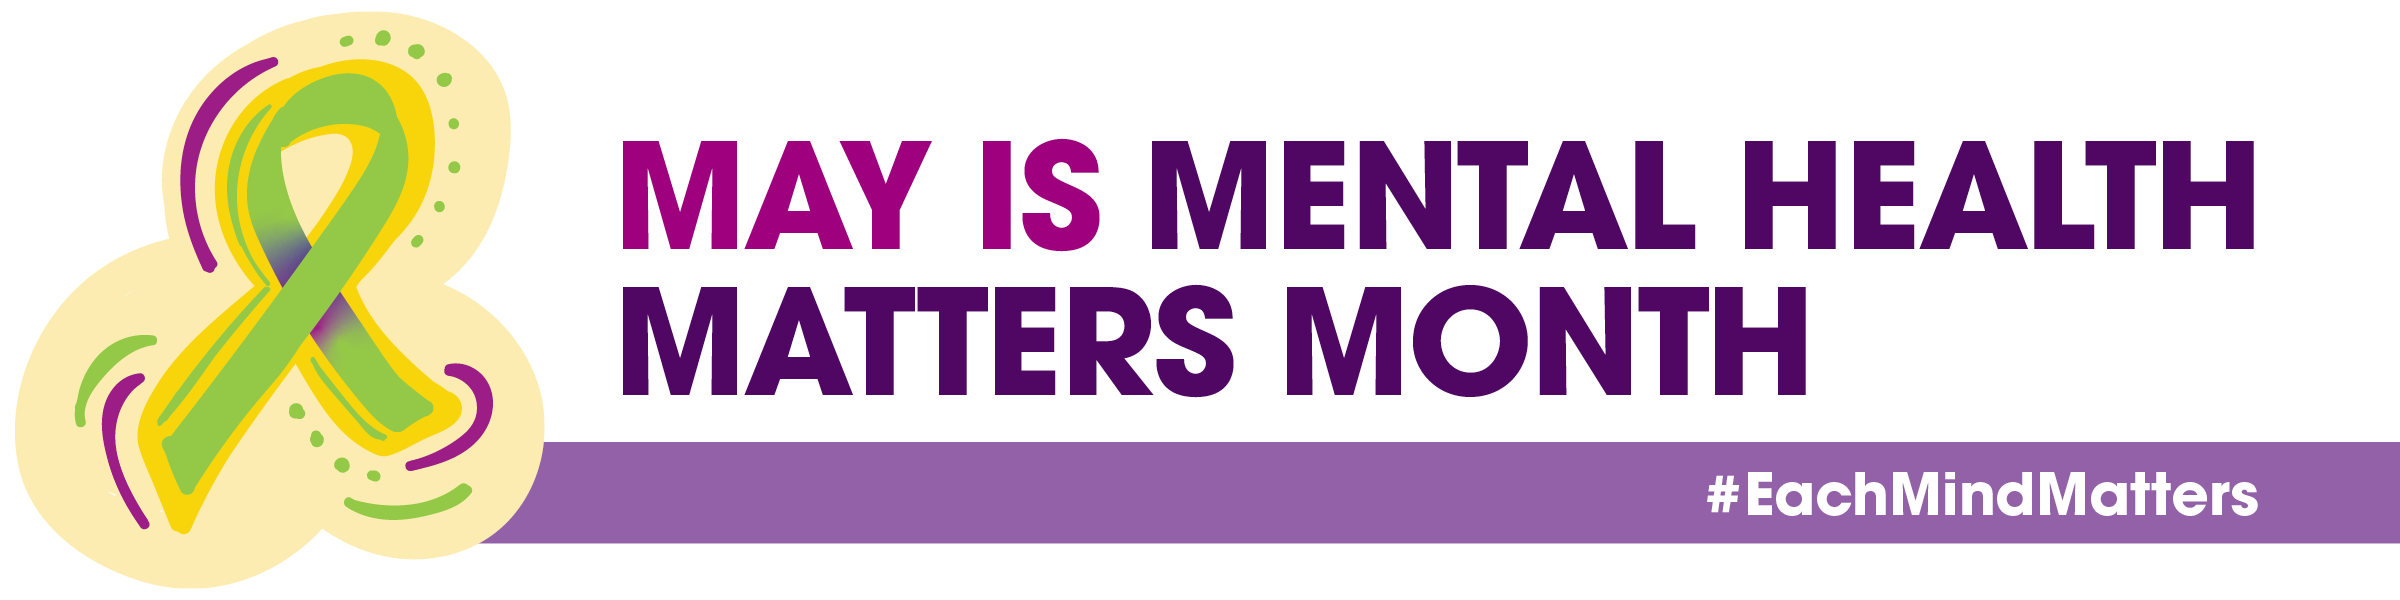 May is mental health matters month